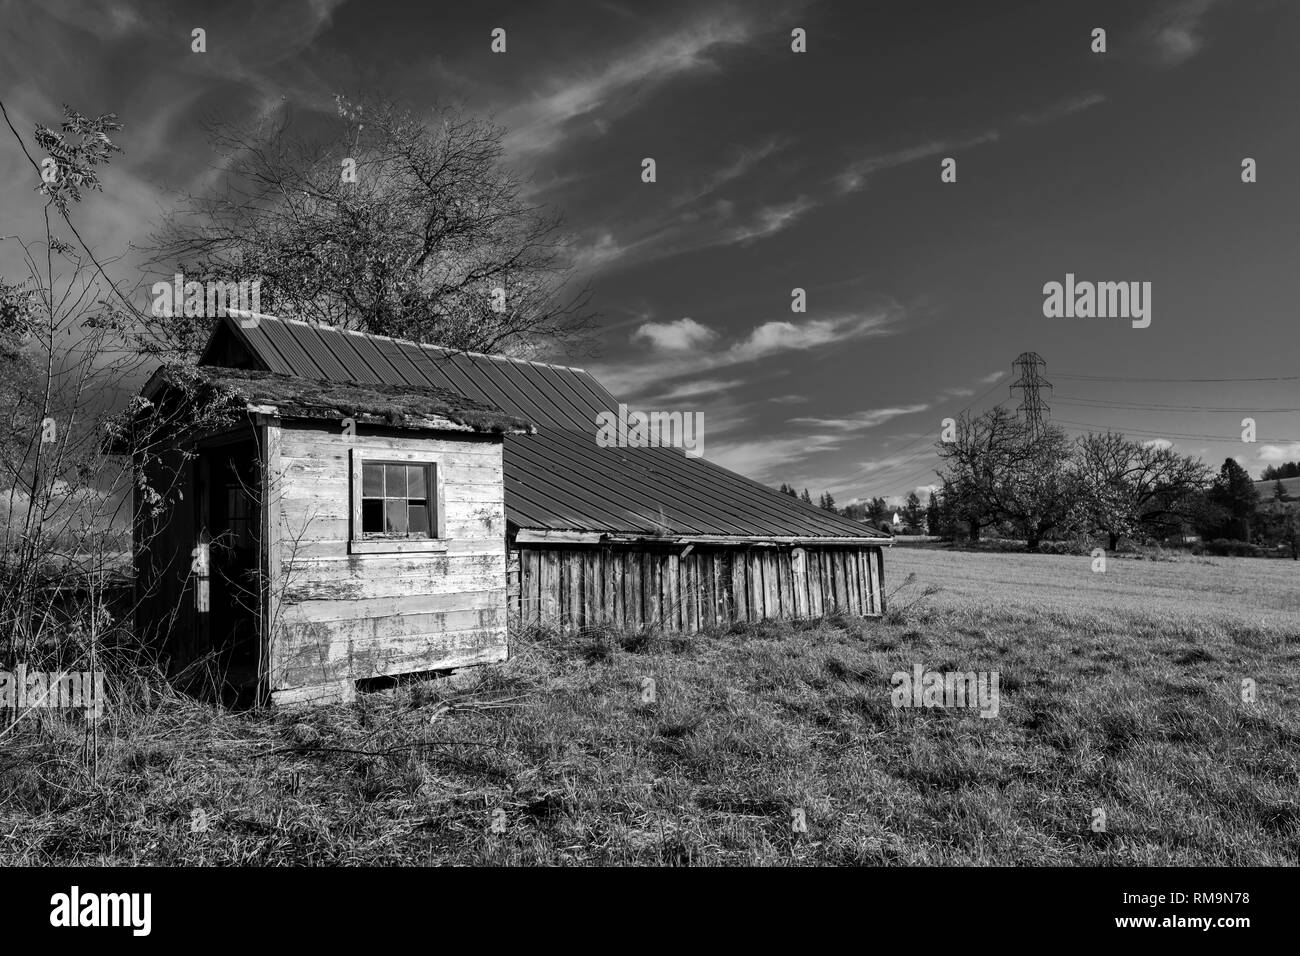 An old dilapidated non-residential barn without a shed with an extension without doors and broken windows stands in the middle of the field as a remin Stock Photo